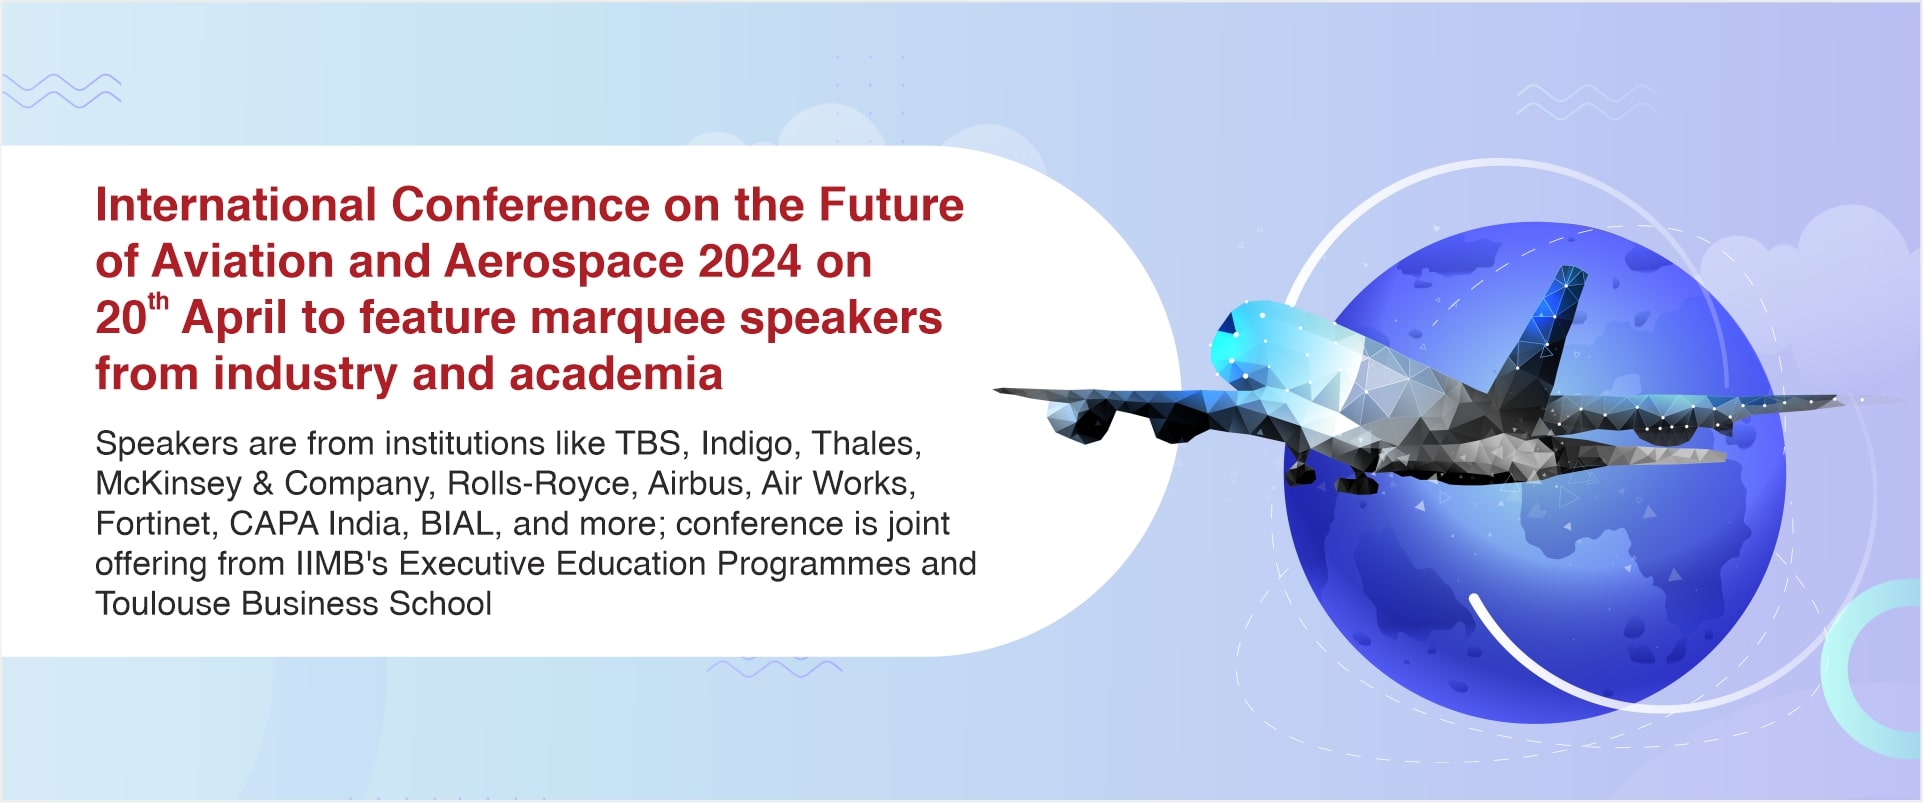 International Conference on the Future of Aviation and Aerospace 2024 on 20th April to feature marquee speakers from industry and academia